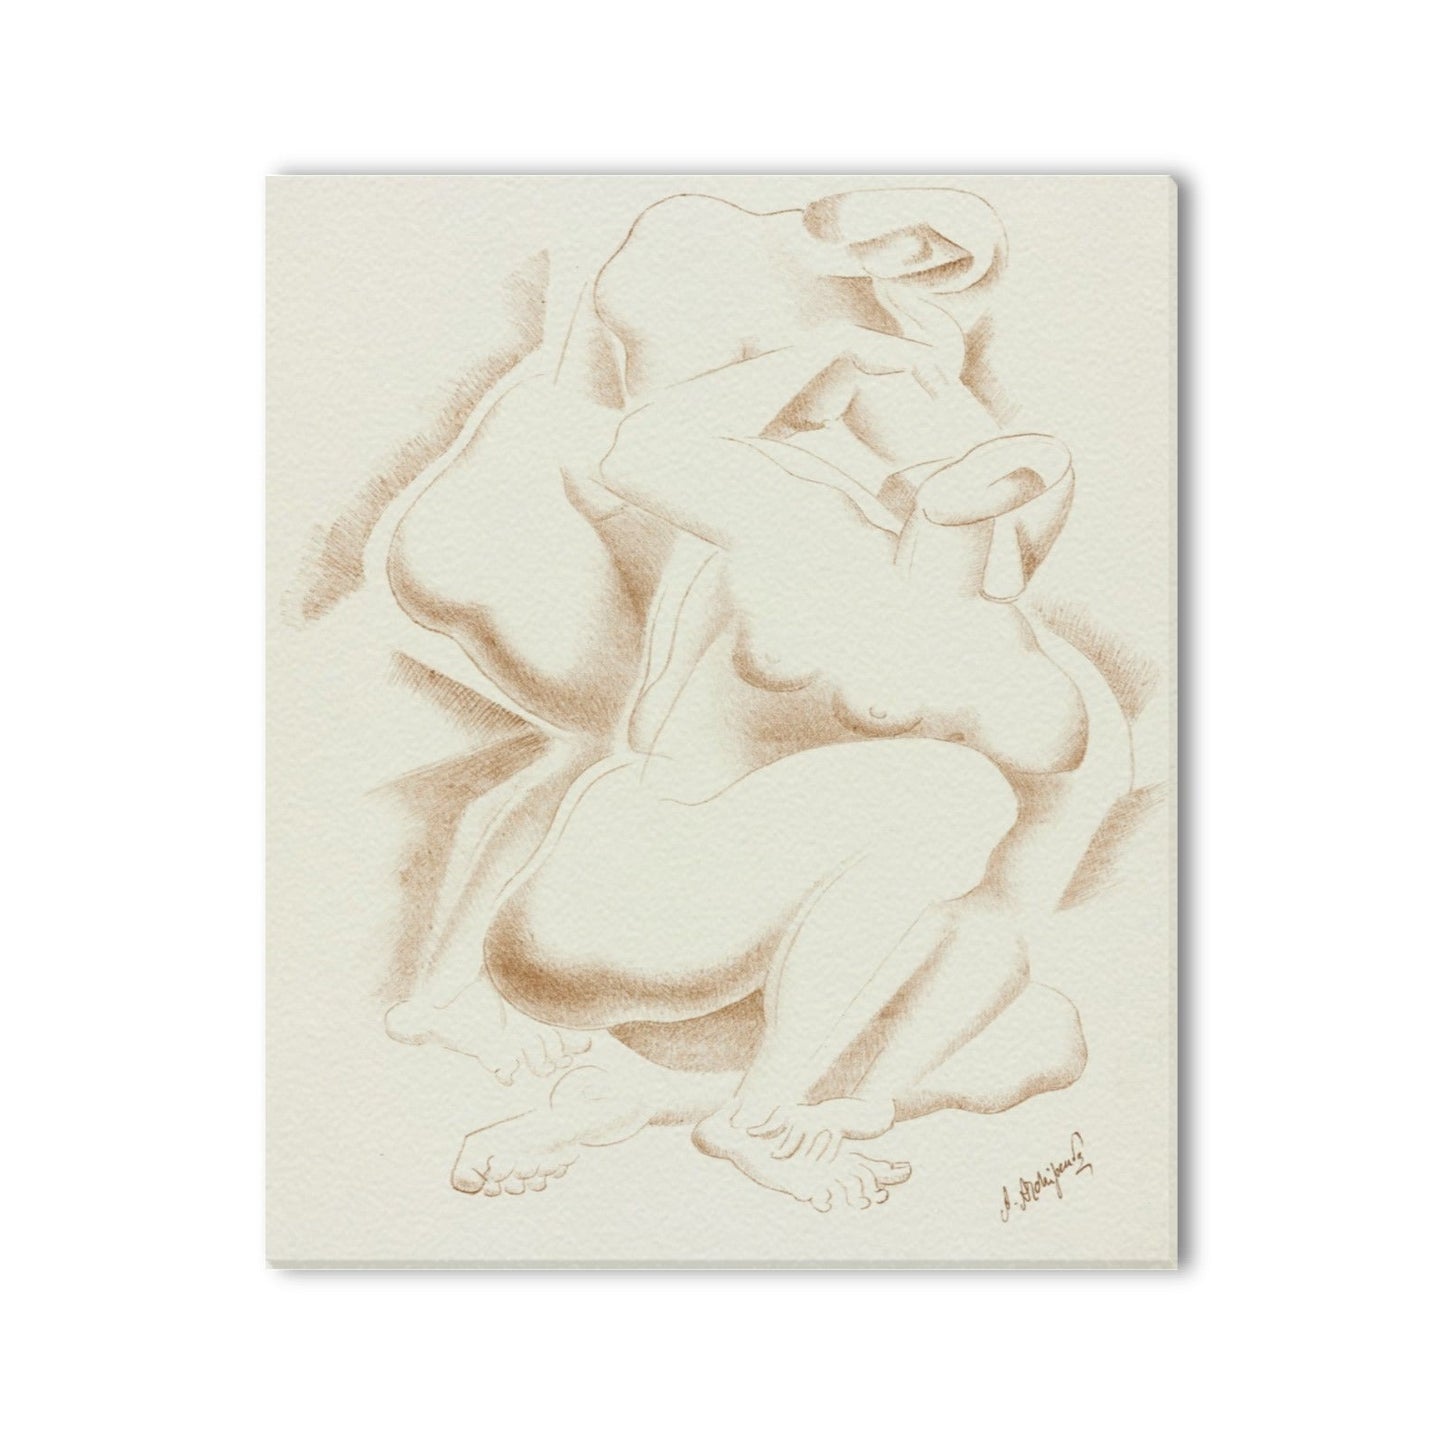 AFTER RODIN - ABSTRACT NUDE - WRAPPED CANVAS PRINT 20" x 24"